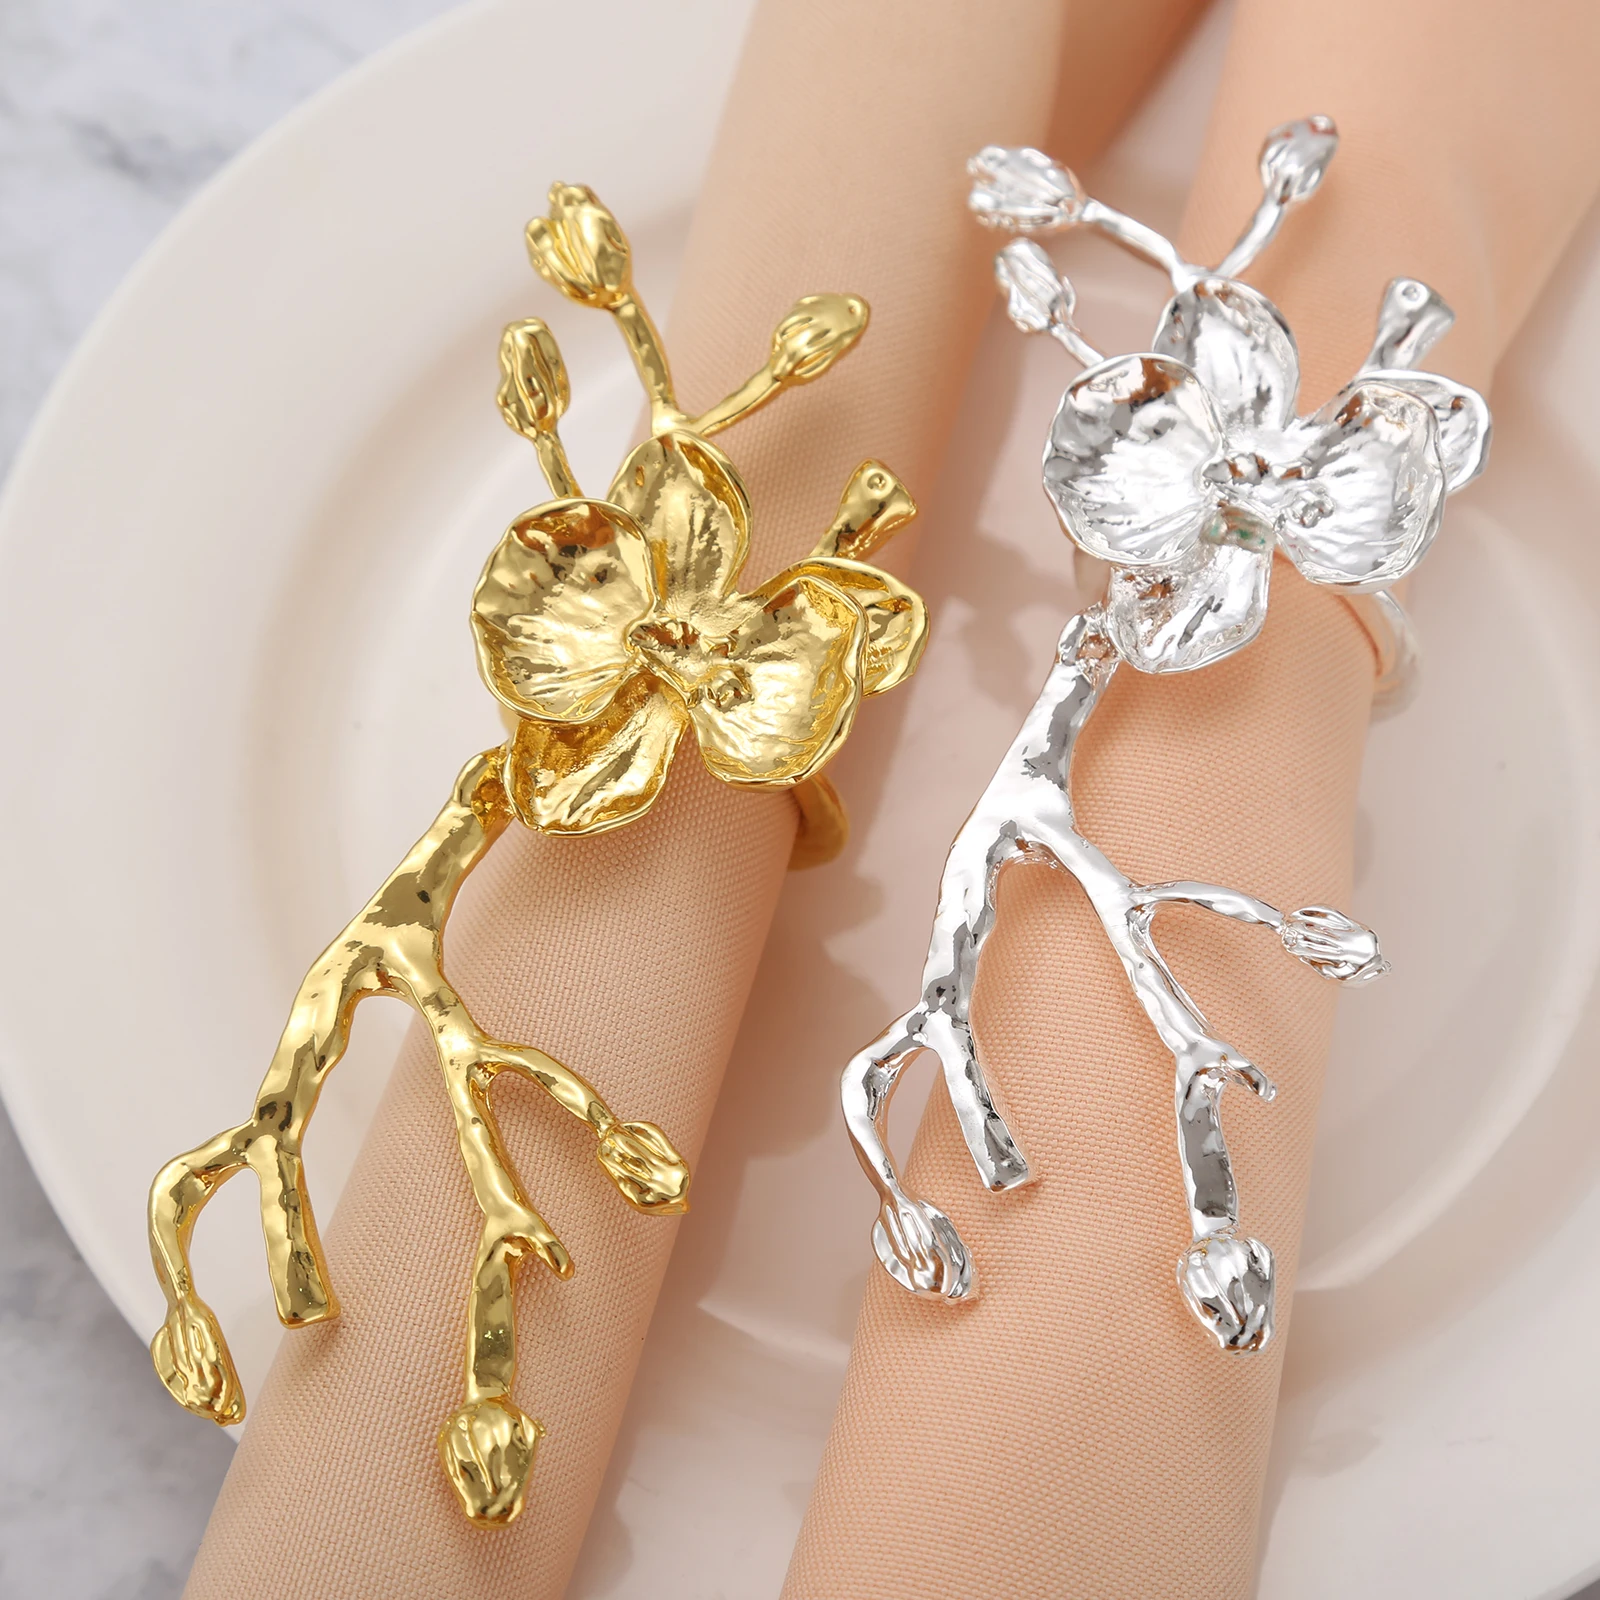 

4Pcs Upscale Napkin Rings Napkin Buckle Holder Plum Blossom,Gold/Silver Towel Ring Wedding Hotel Western Dinner Table Decoration